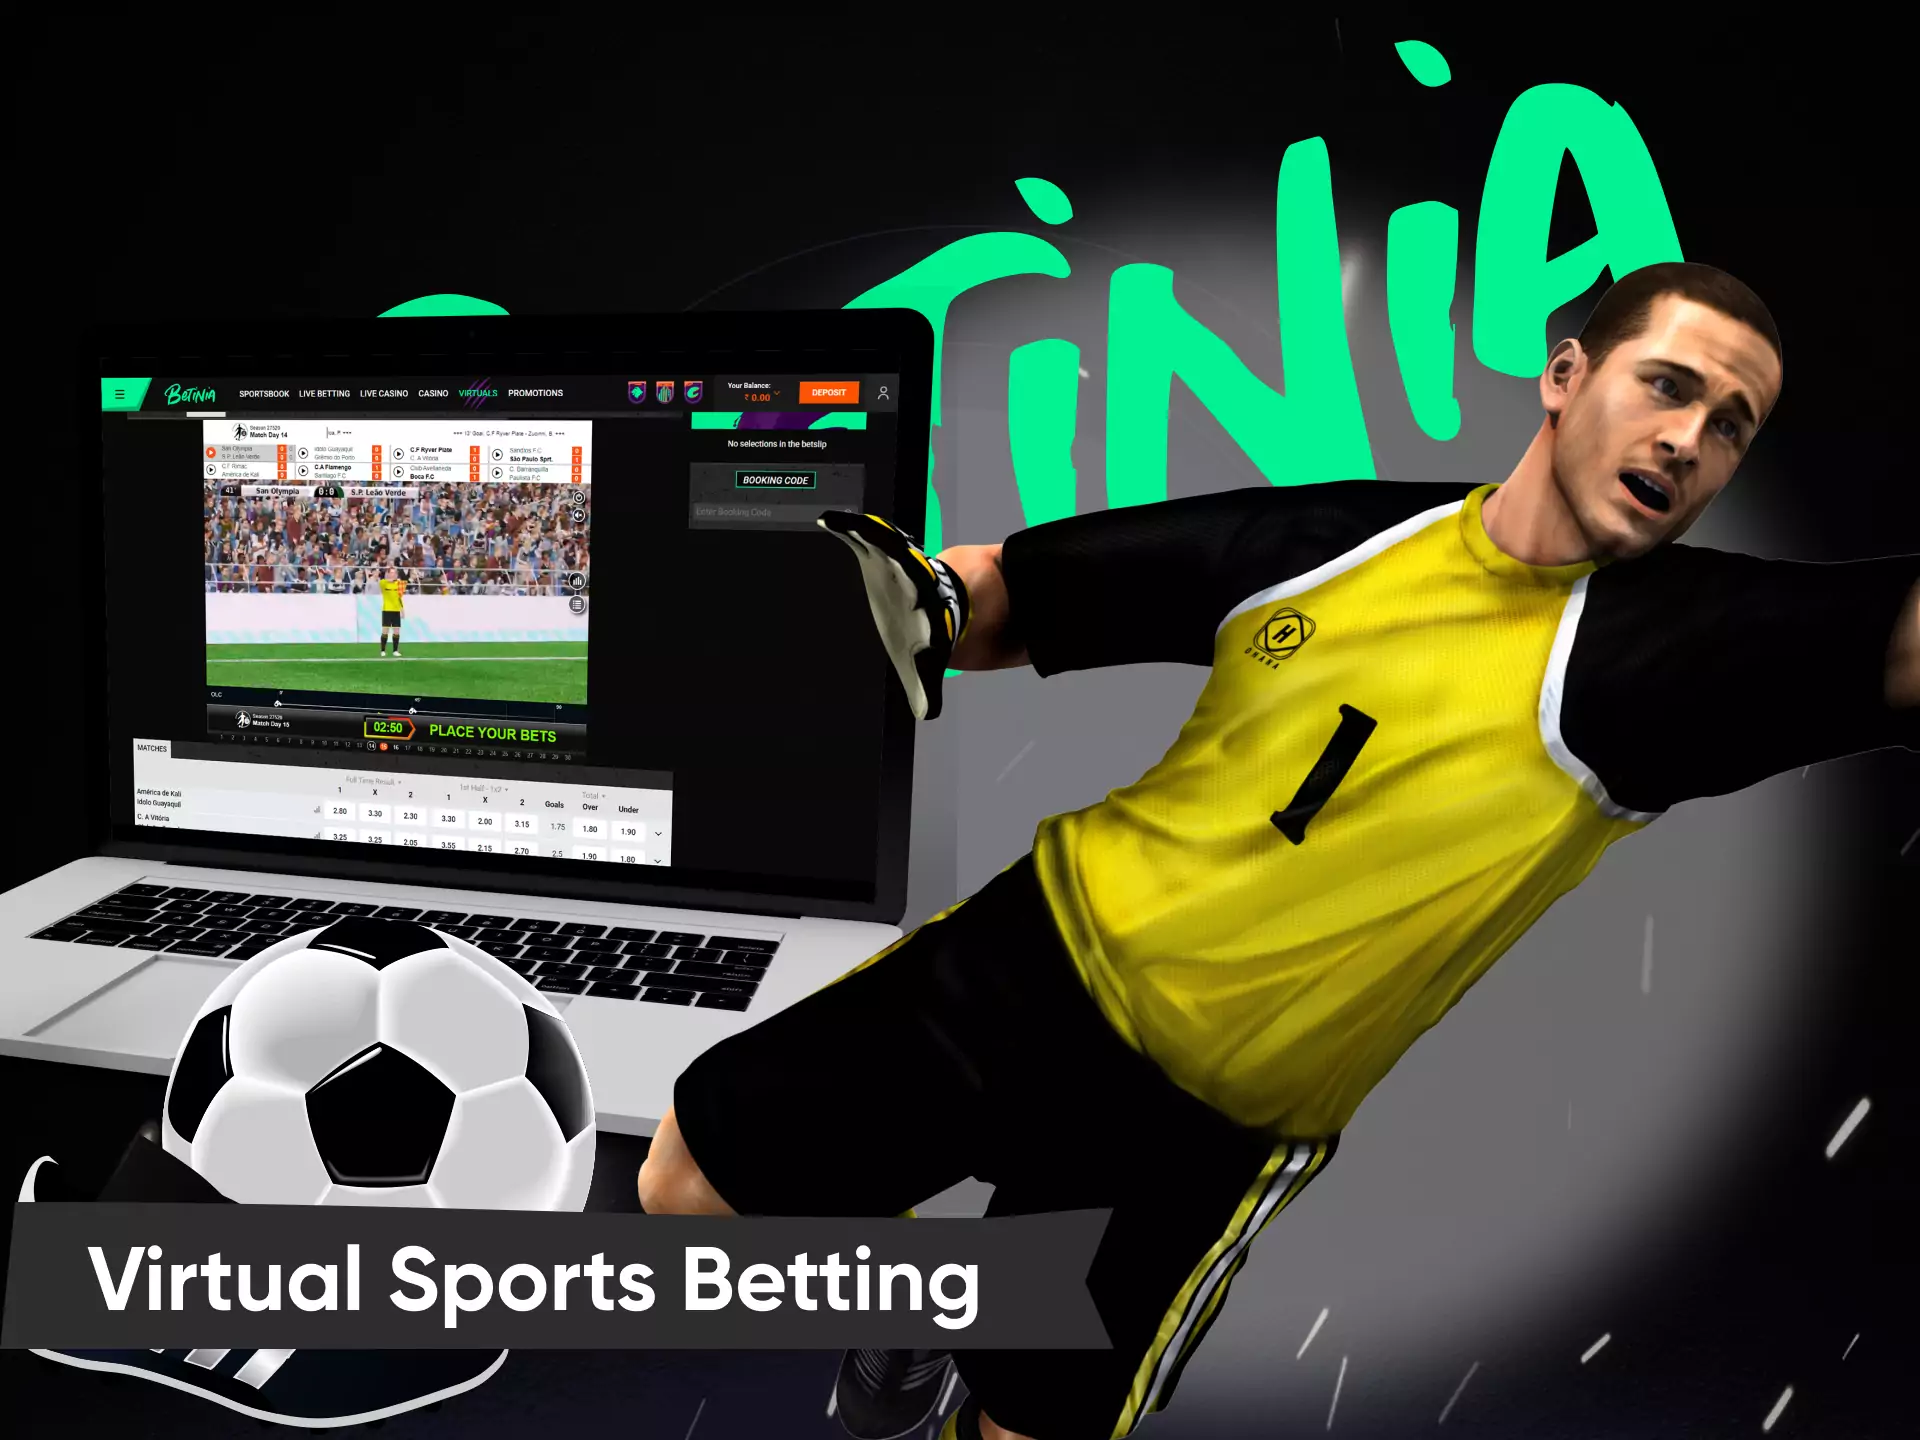 On the Betinia website, you can bet on virtual sports as well.